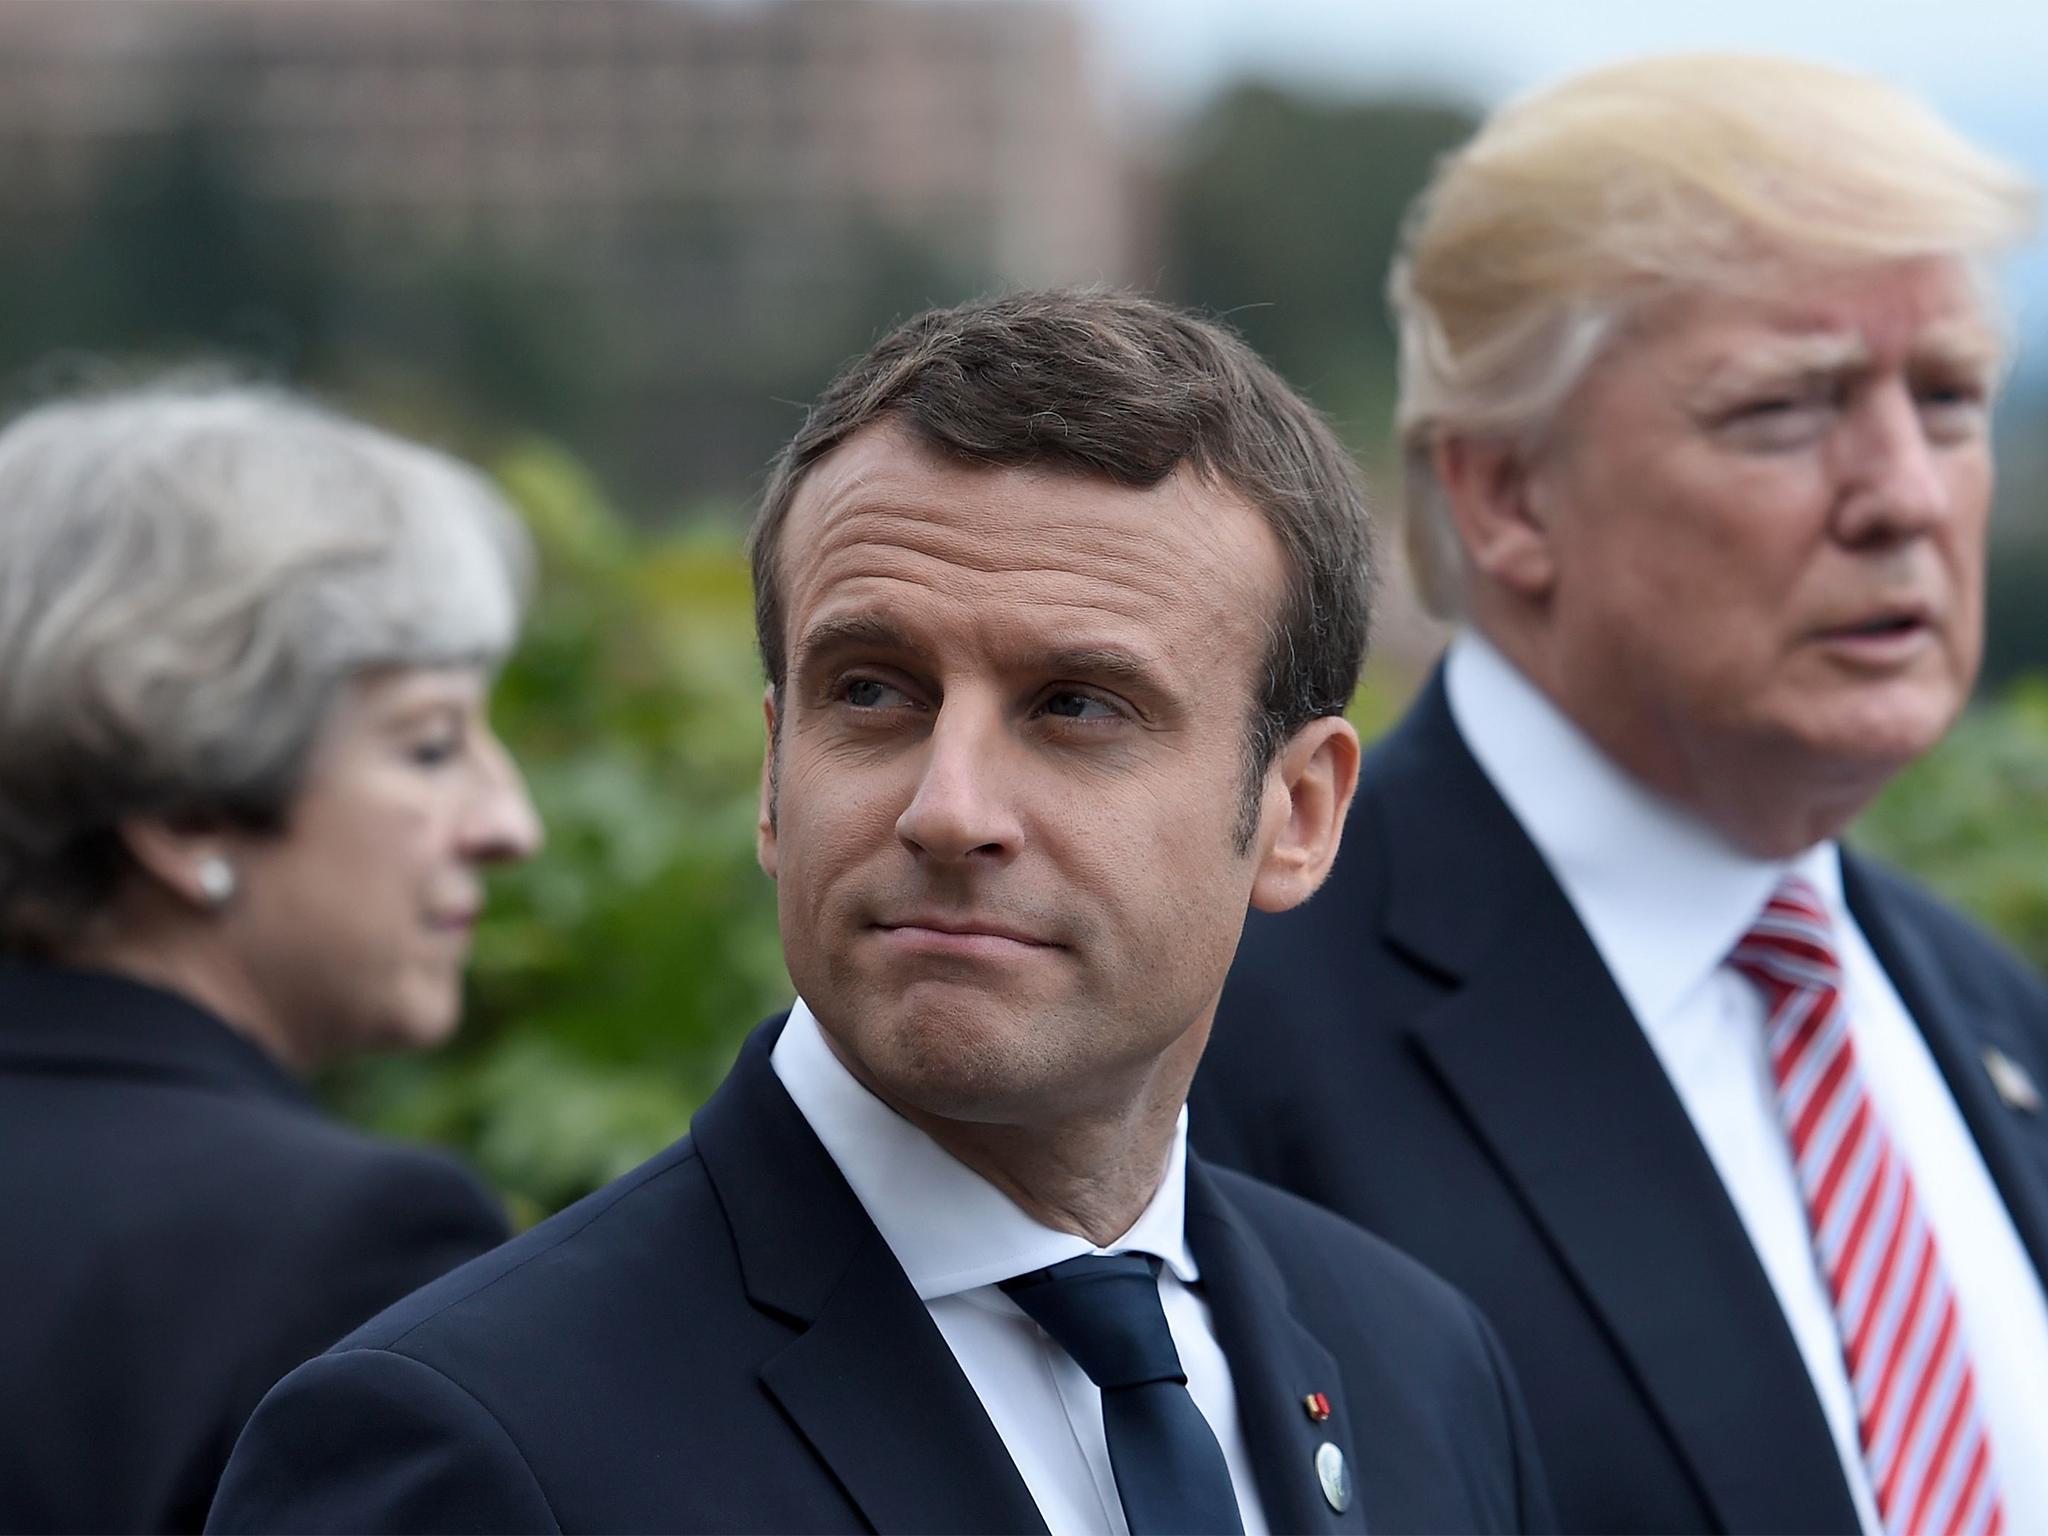 French president Emmanuel Macron has called on other members of the group to stand up against the United States’ position on trade tariffs